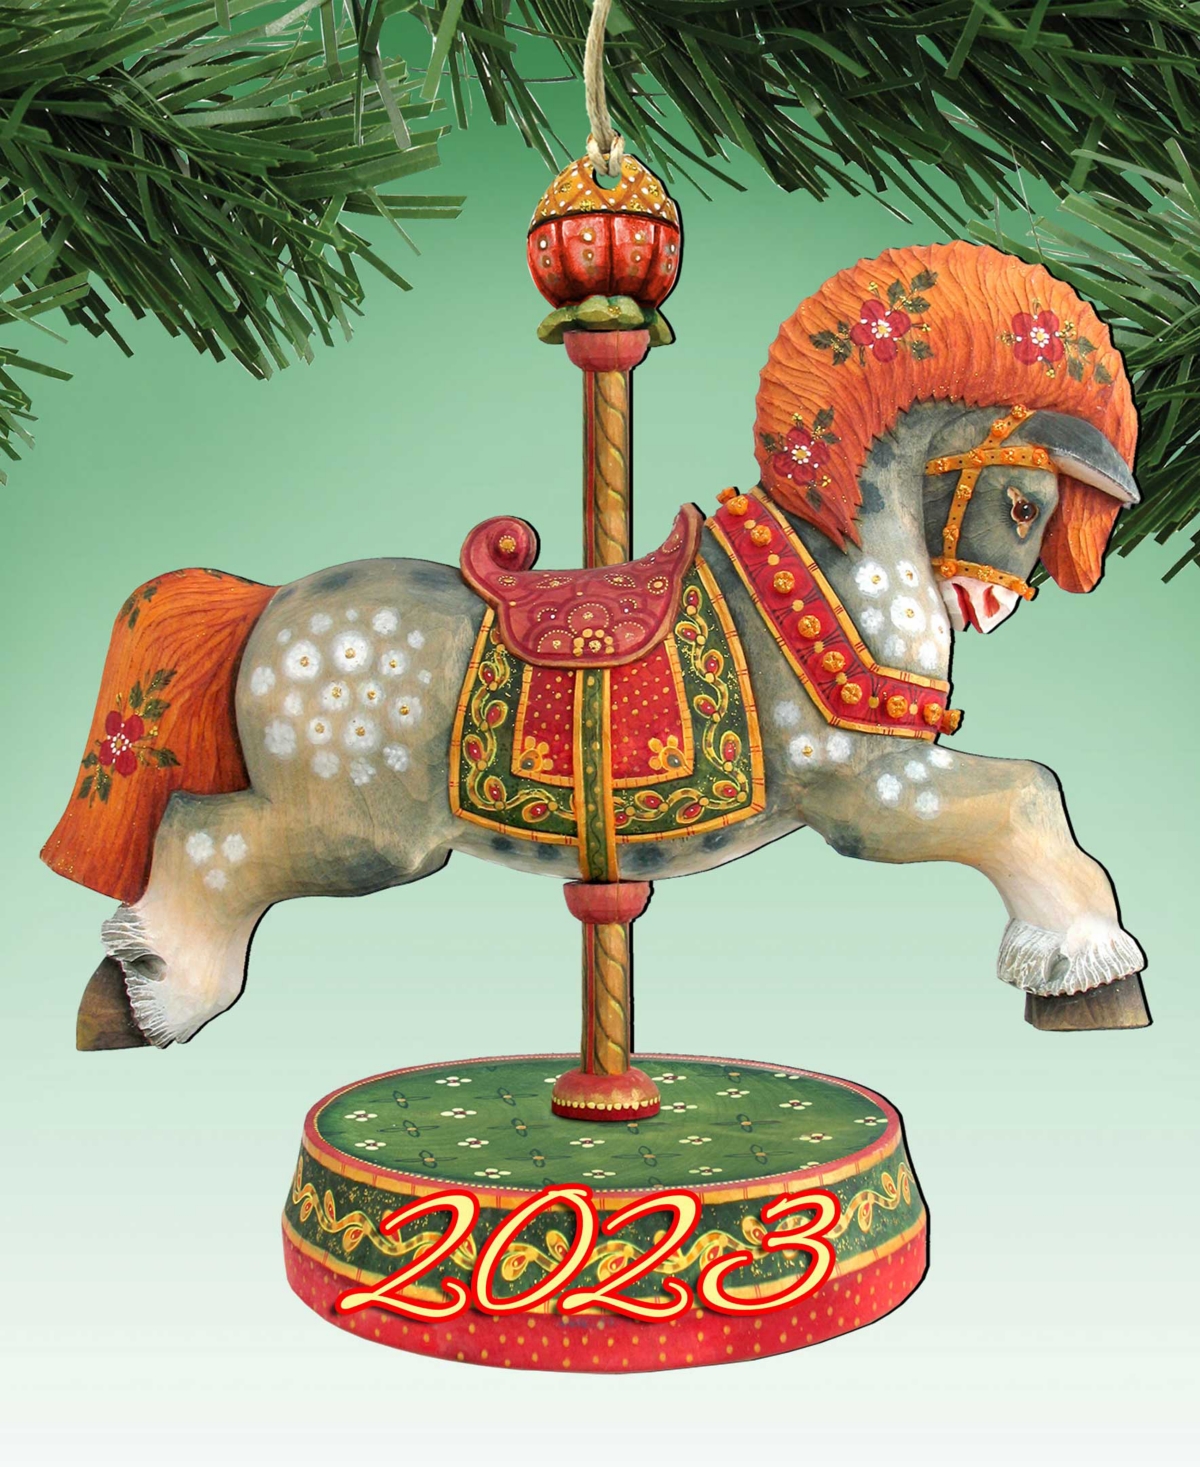 Designocracy 2023 Dated Carousel Horse Christmas Wooden Ornaments Holiday Decor Set Of 2 G. Debrekht In Multi Color